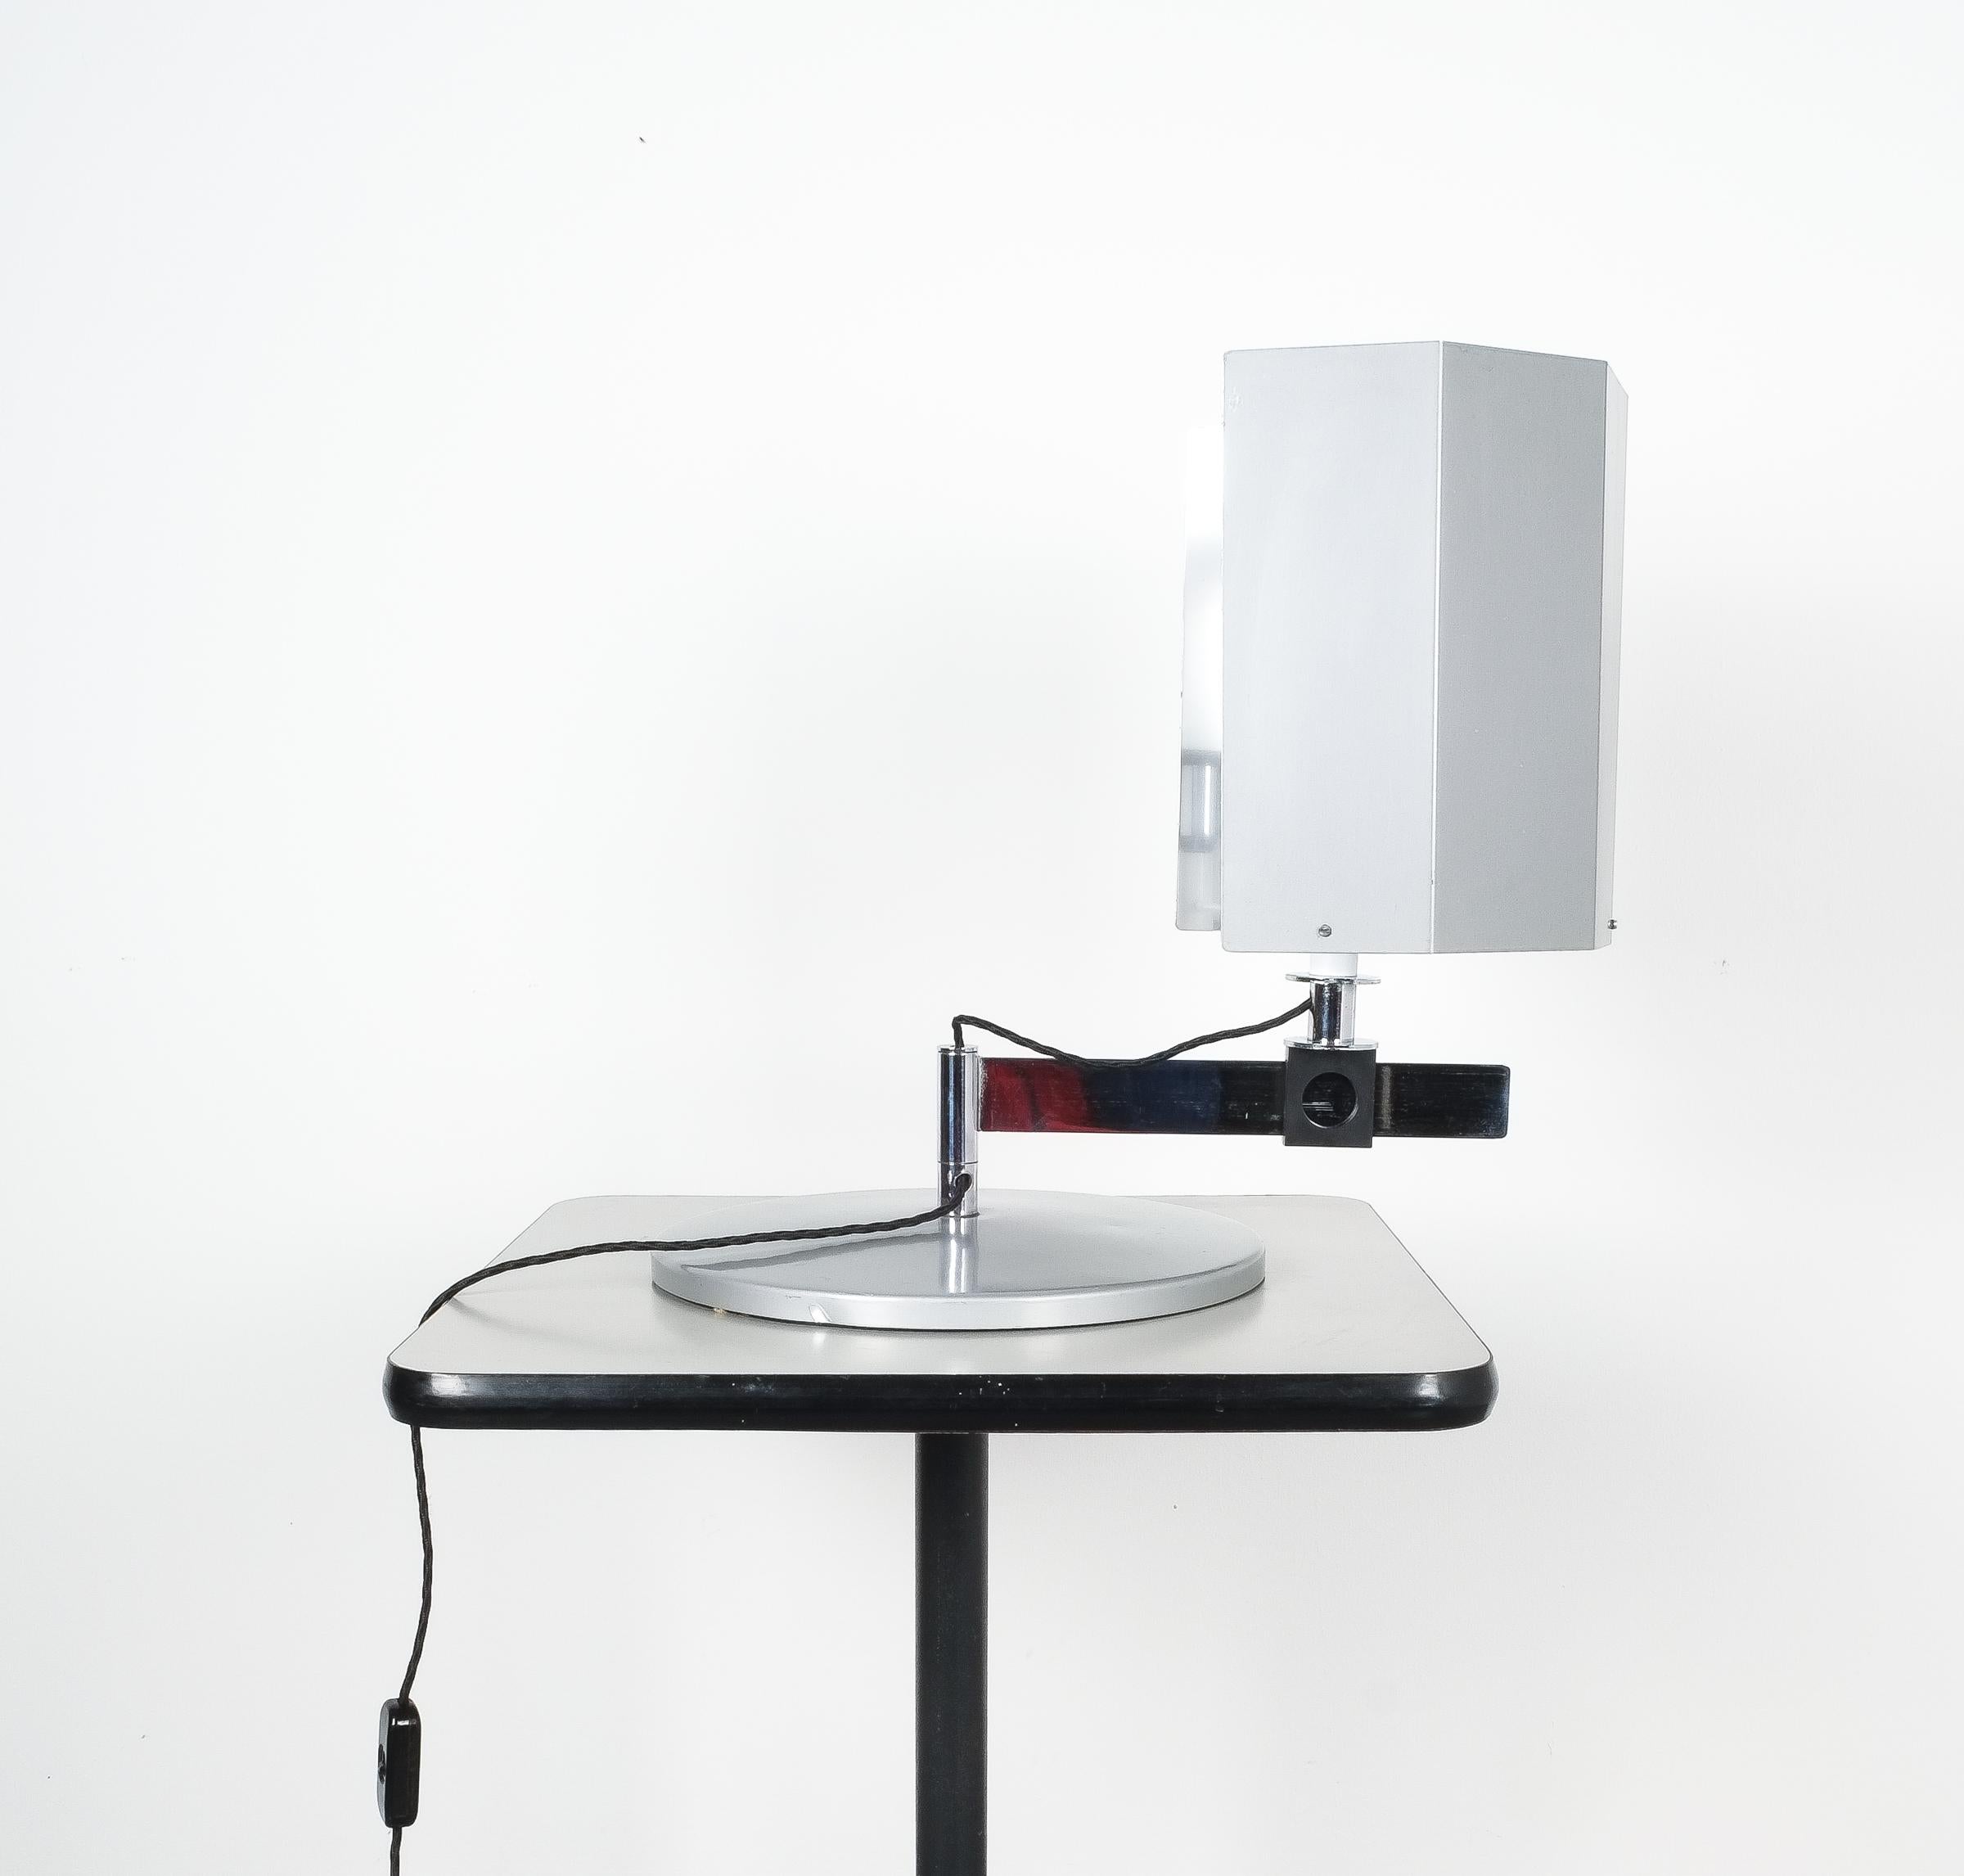 Bauhaus desk light by Carl J. Jucker, Germany. 

Large table lamp originally designed in 1923 but deriving from a later production probably 1970s or 1980s. This metal desk light can be moved into all kinds of different positions. The shade of the